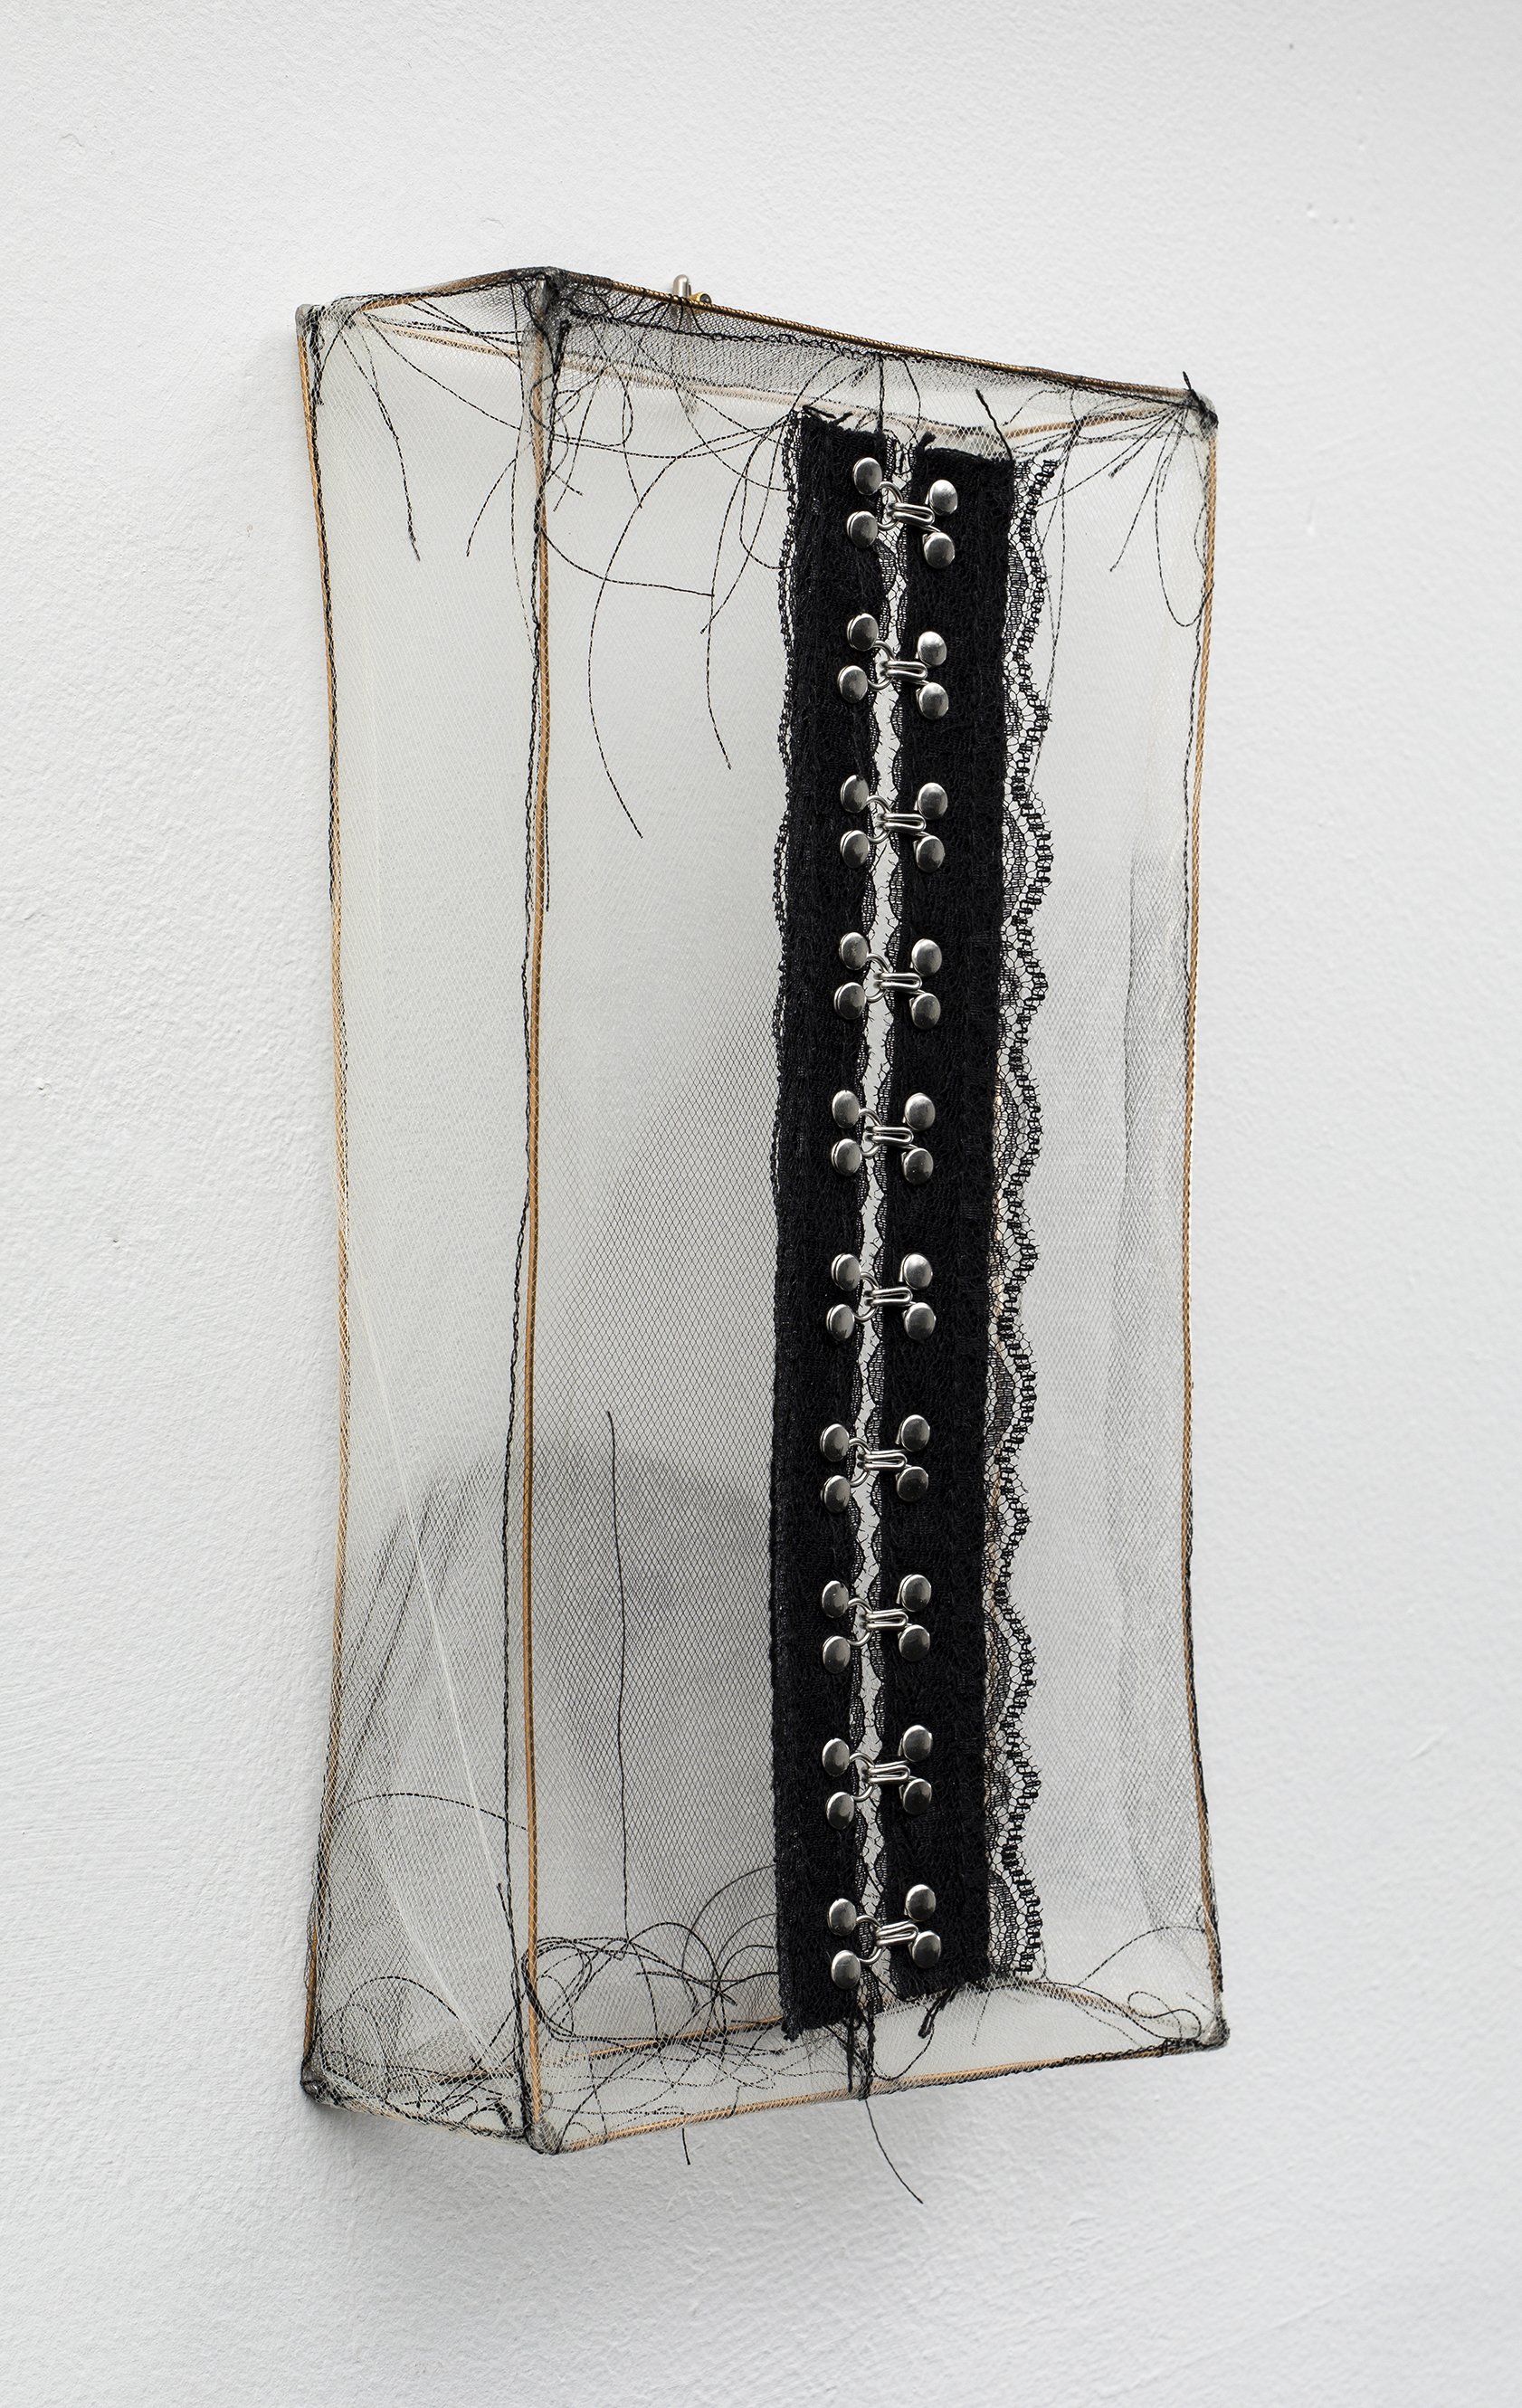  Covey Gong, Untitled, 2022. Acrylic, nylon, cotton, bronze, tin. 11 x 6 x 2.25 inches. 